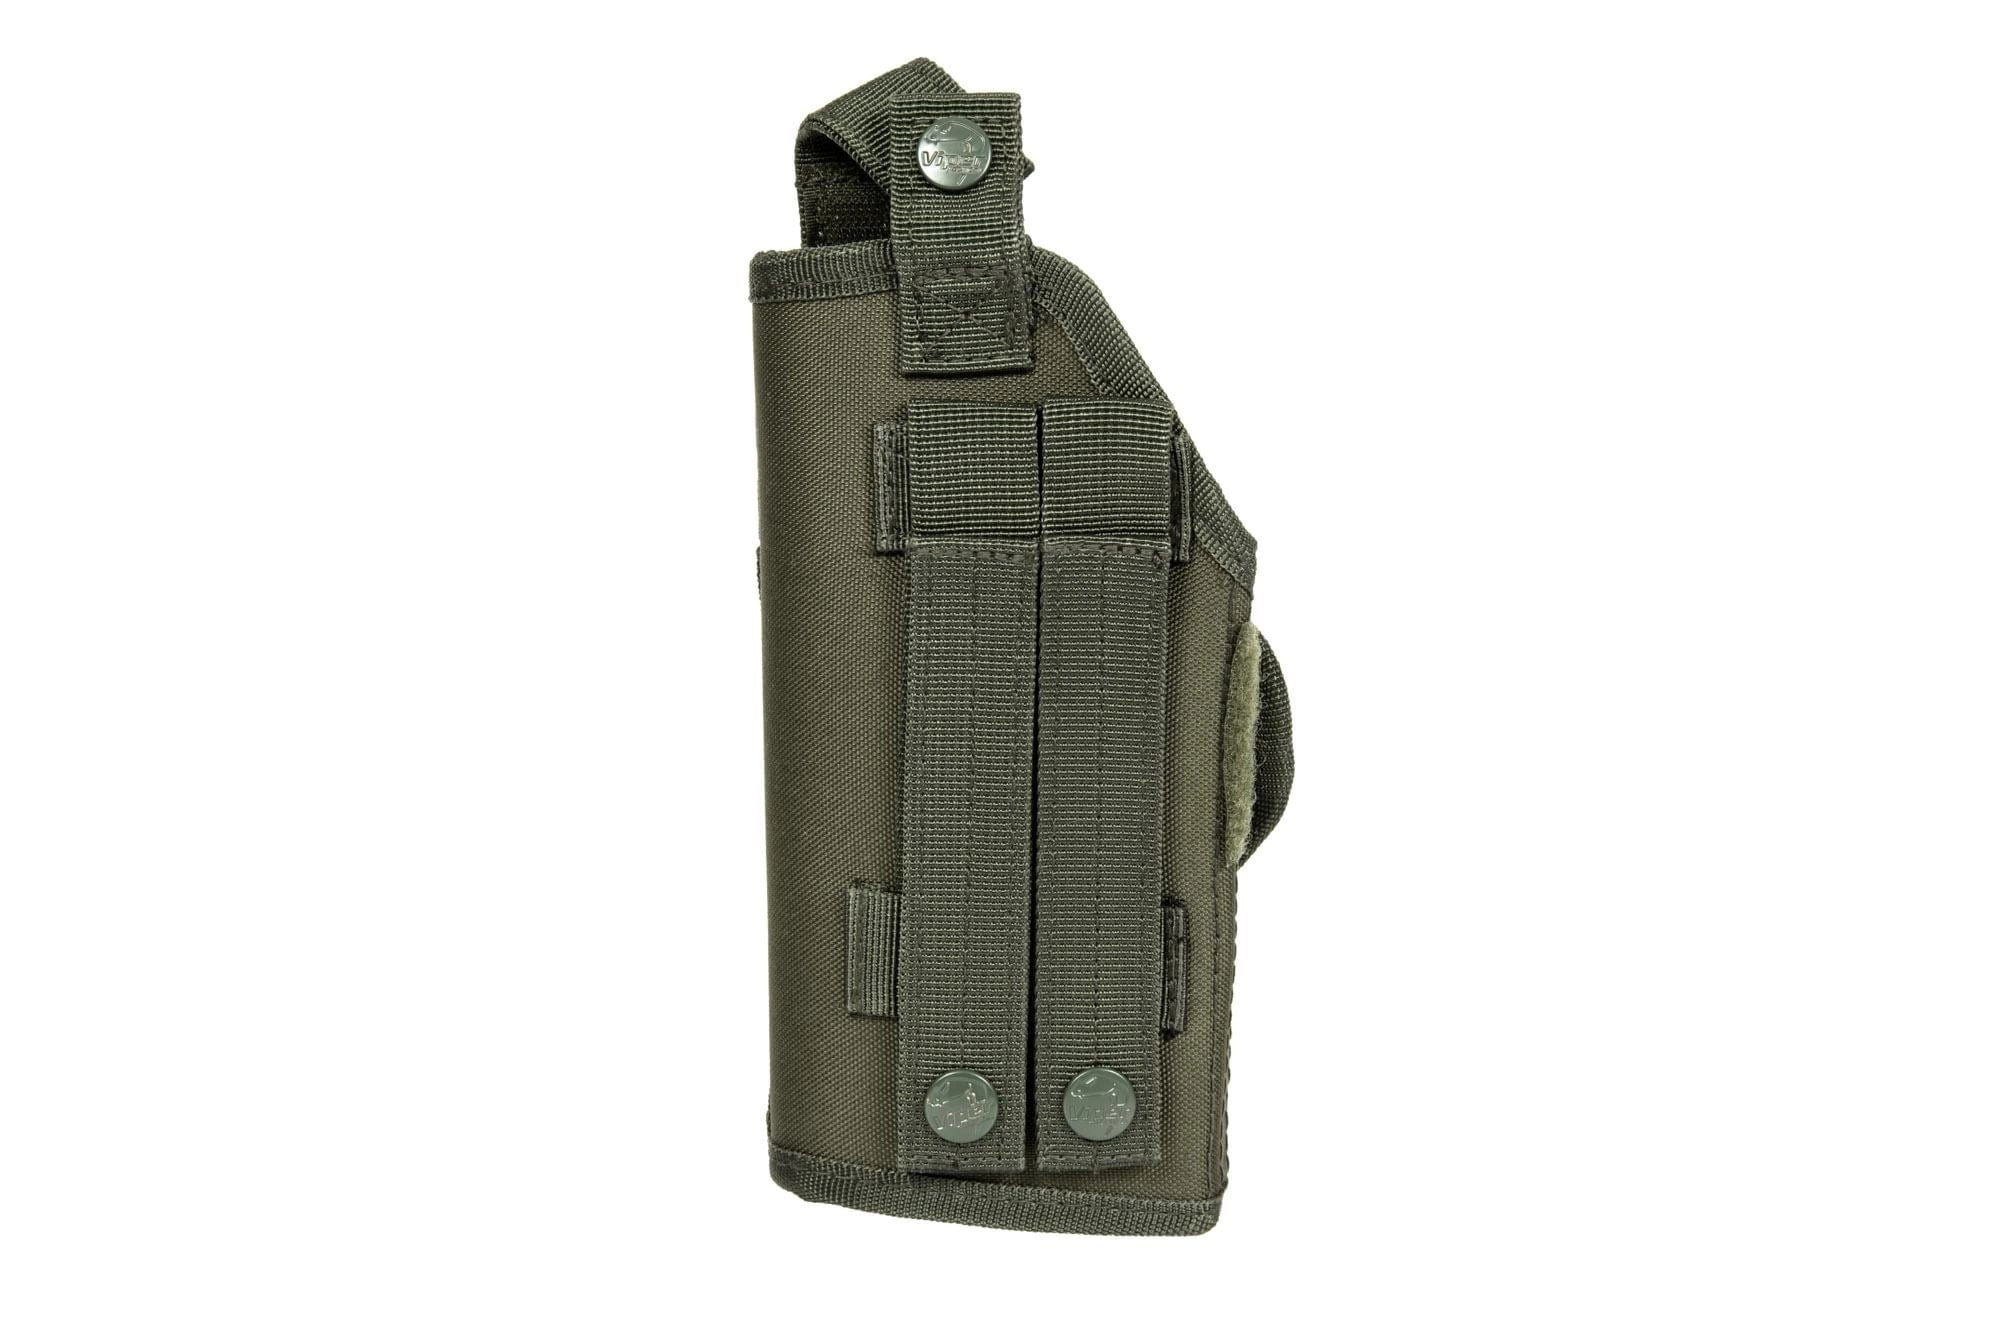 Holster universel réglable MOLLE - olive